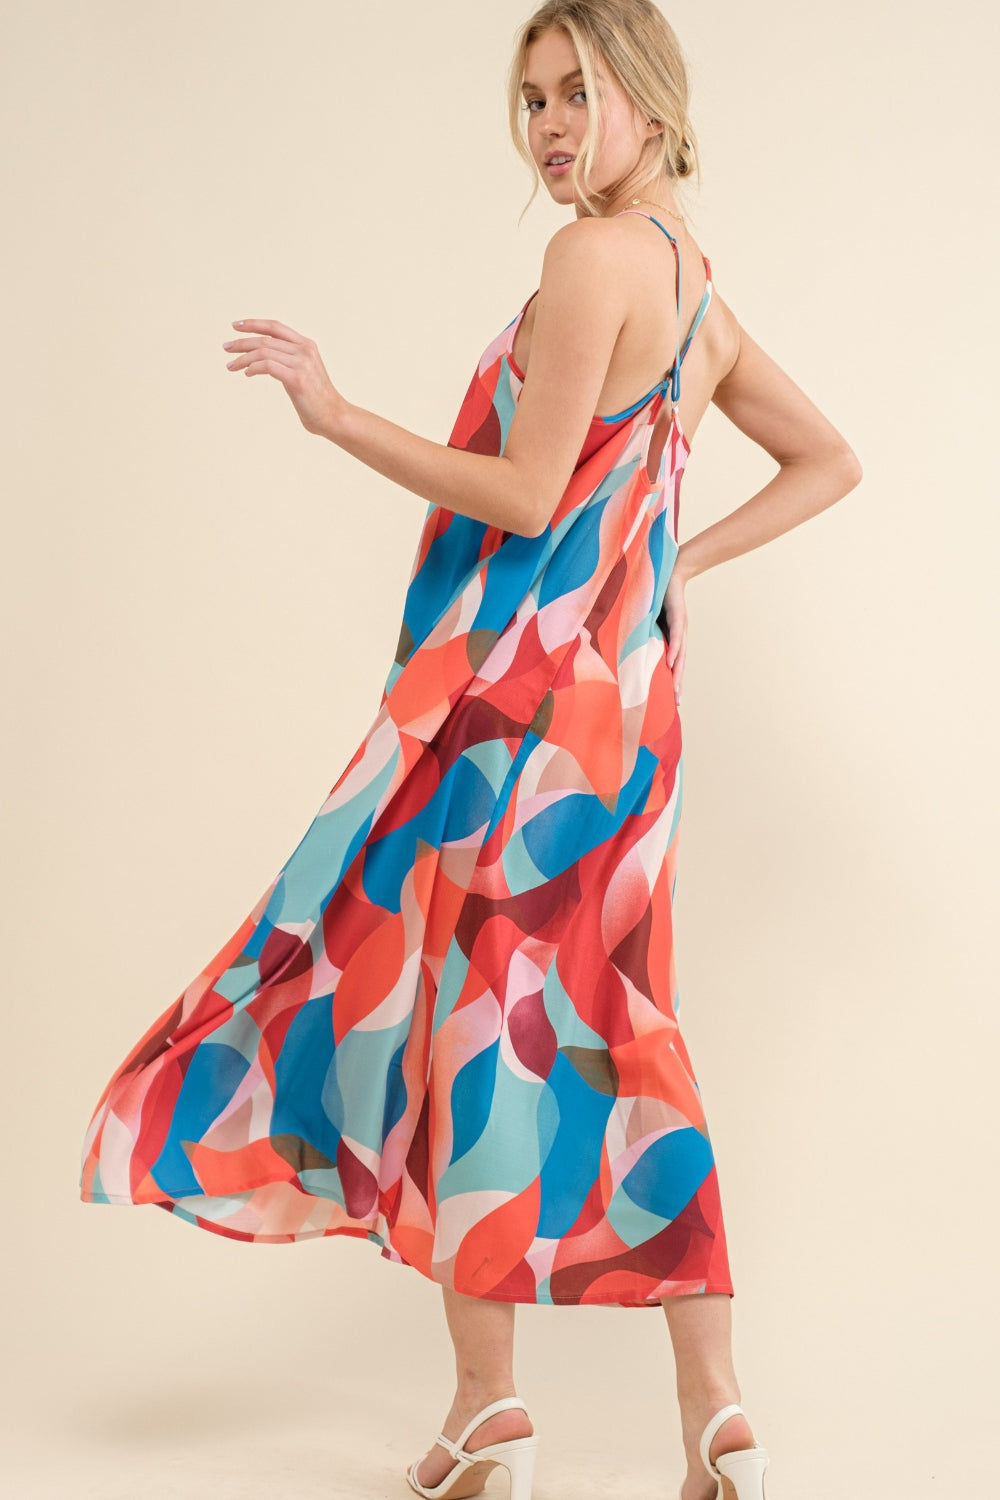 Hazel Blues® |  And the Why Printed Crisscross Back Cami Dress